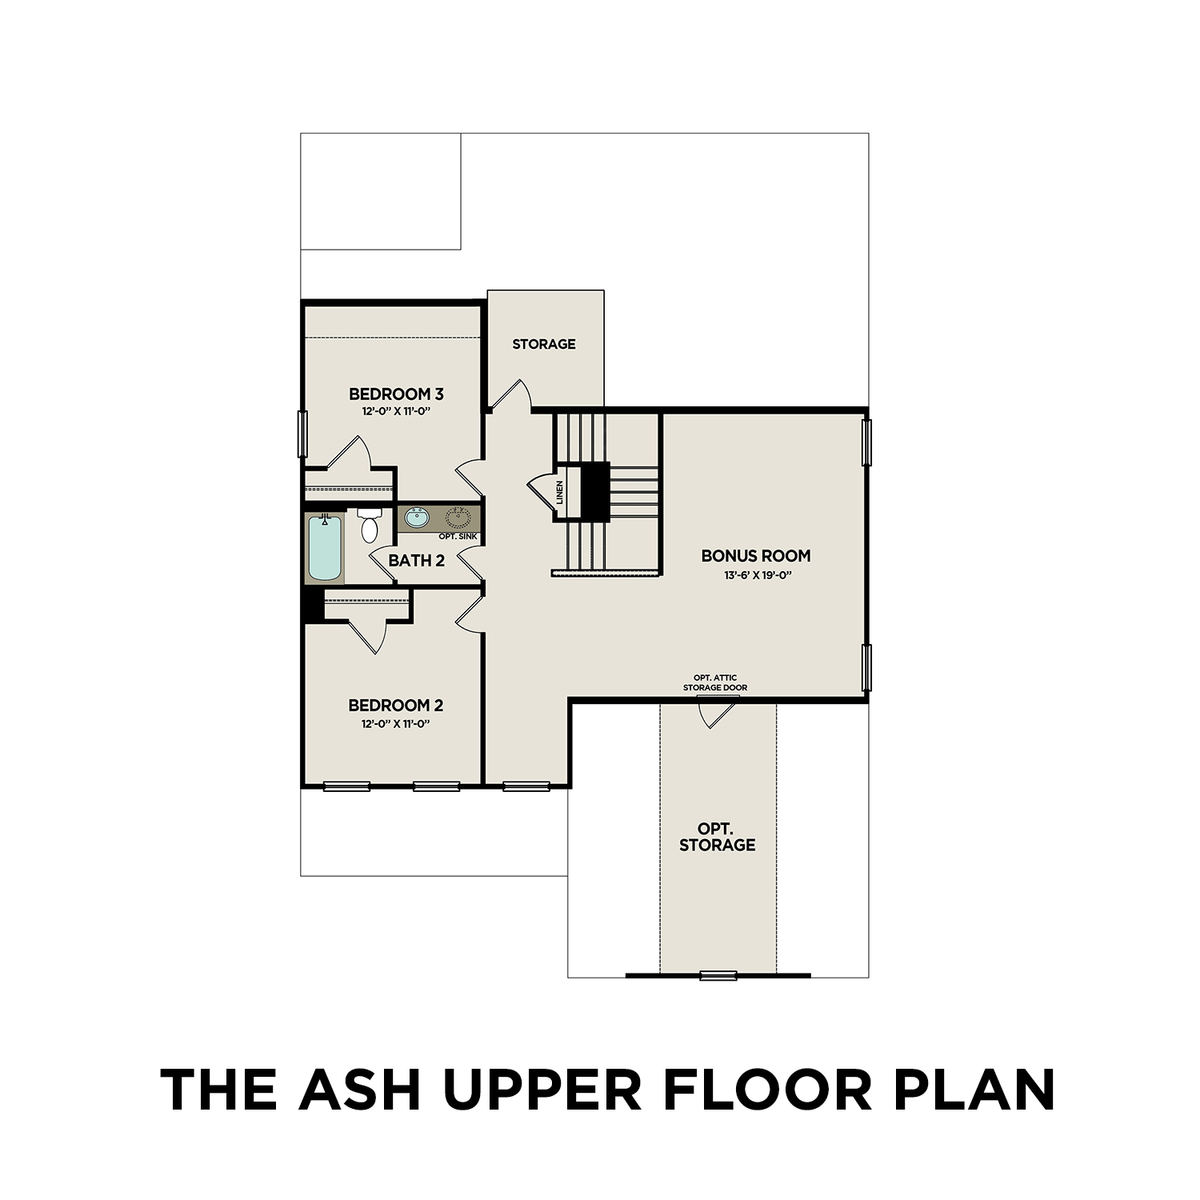 2 - The Ash A buildable floor plan layout in Davidson Homes' Carellton community.